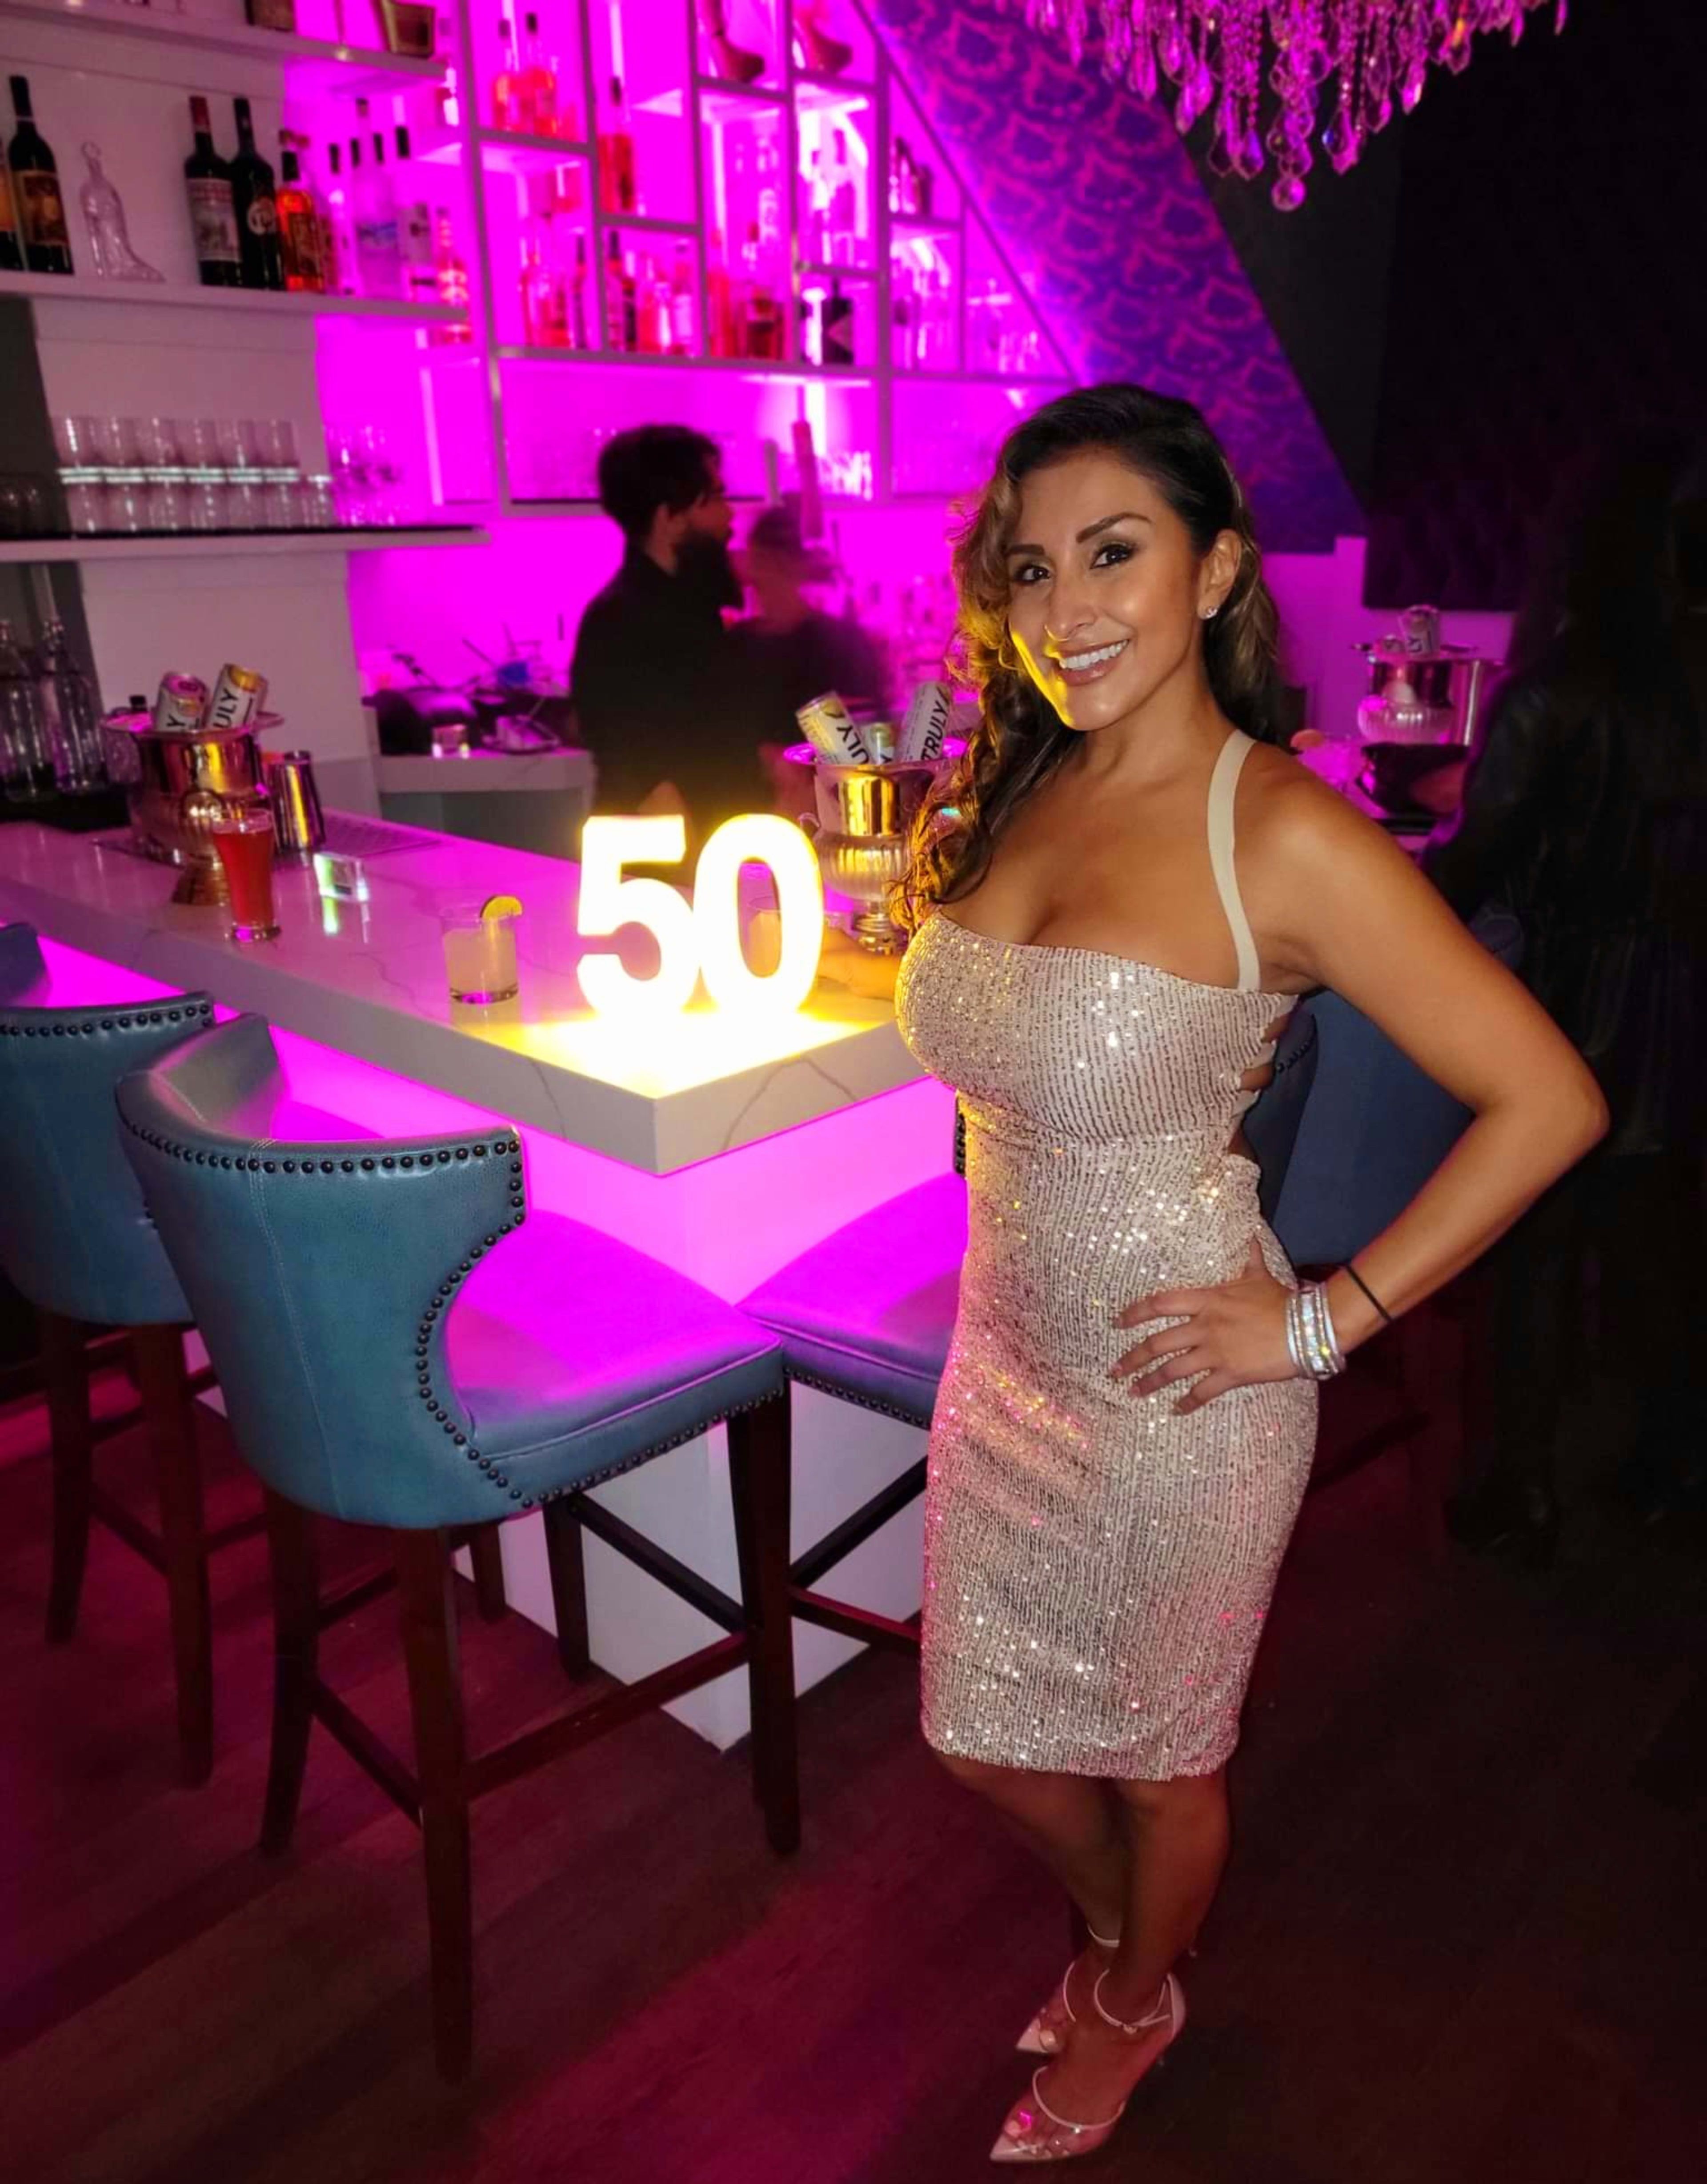 A woman standing in front of a birthday sign on a table at a party.